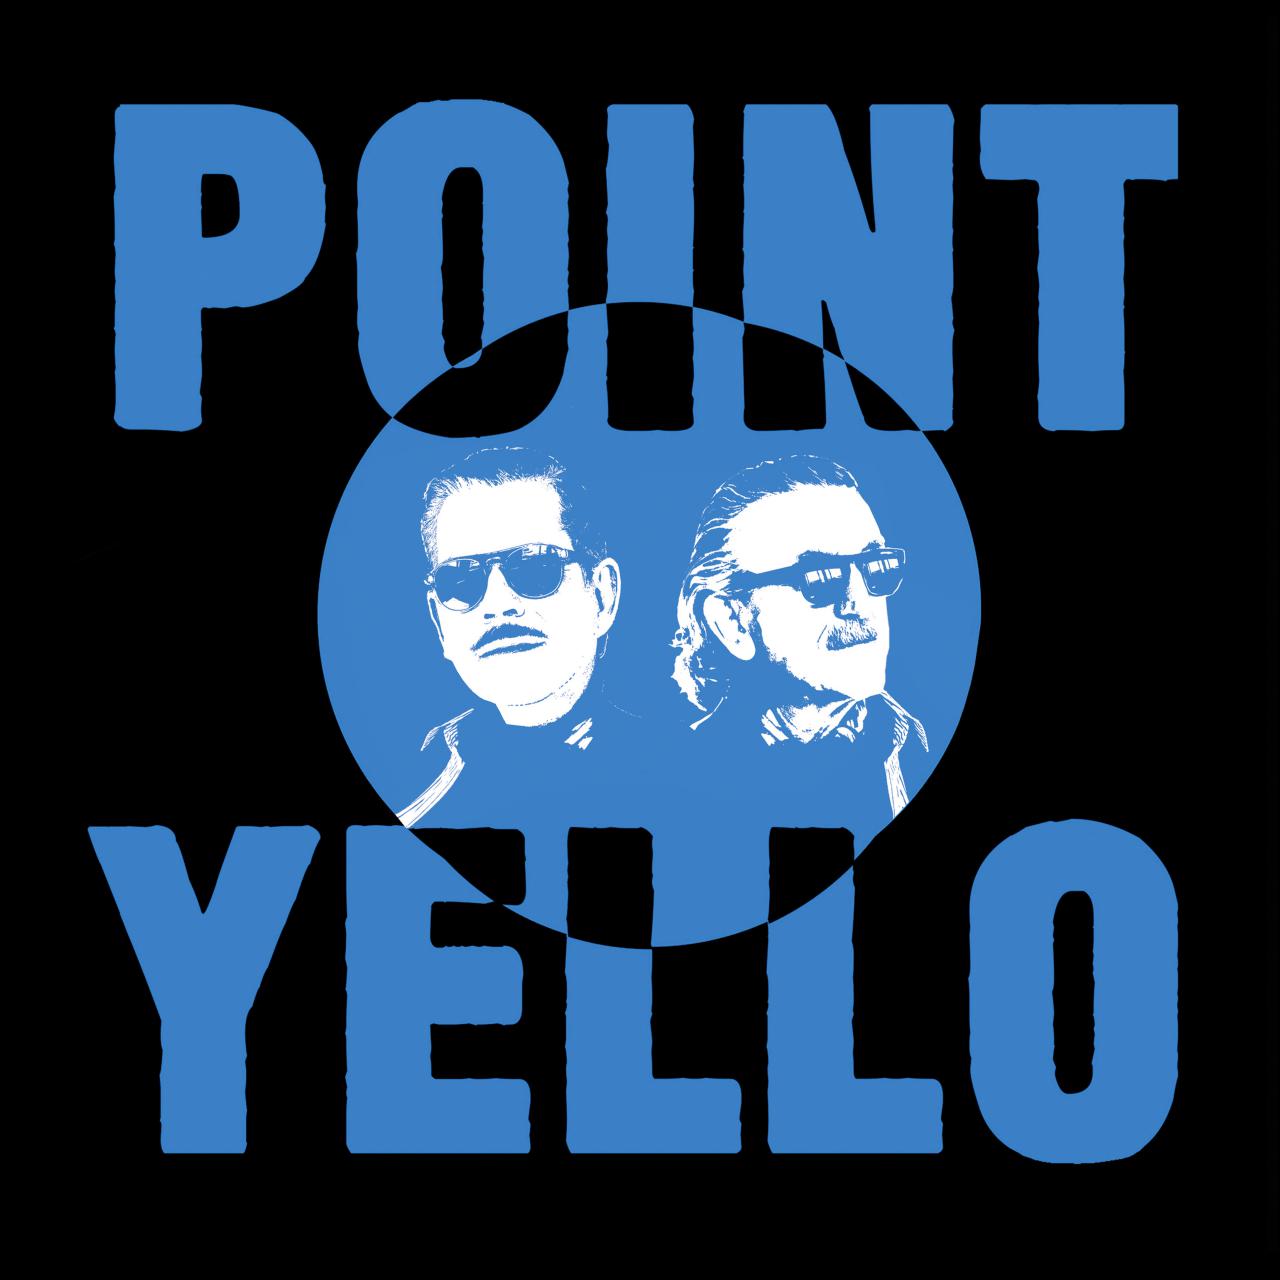 The album cover of "Point" by the music duo Yello. Above is "Point", below is "Yello" and in the middle is a circle, which represents the silhouette of the two heads of the musicians.